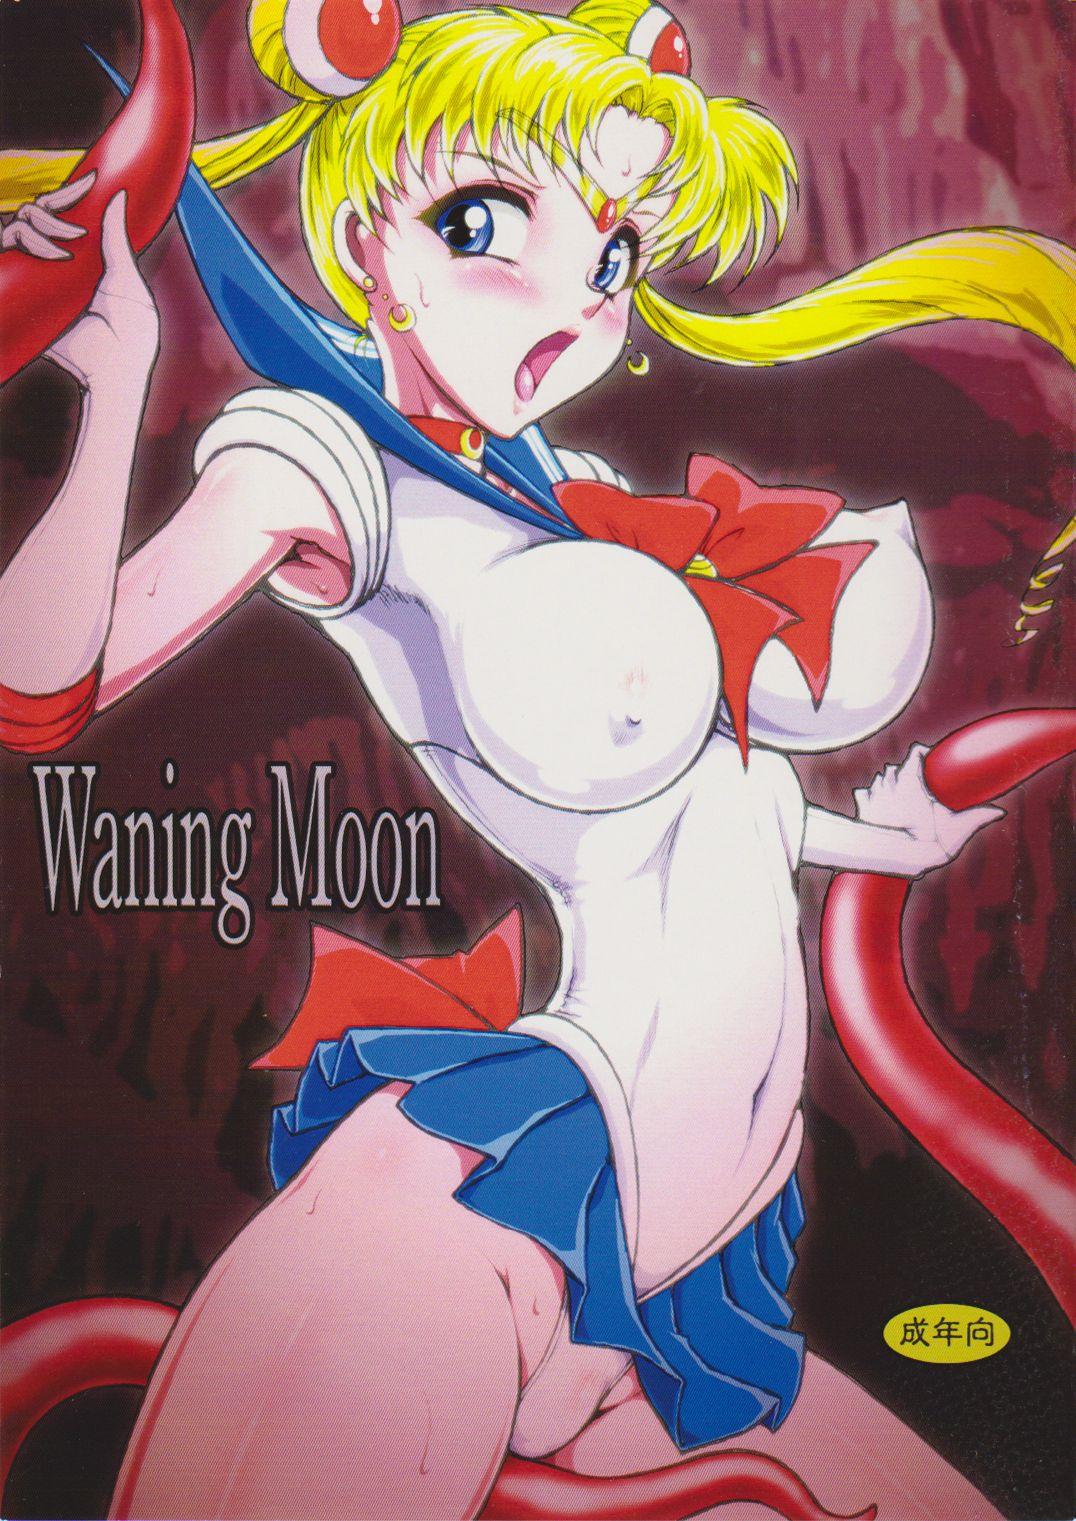 Youth Porn Waning Moon - Sailor moon Moneytalks - Picture 1